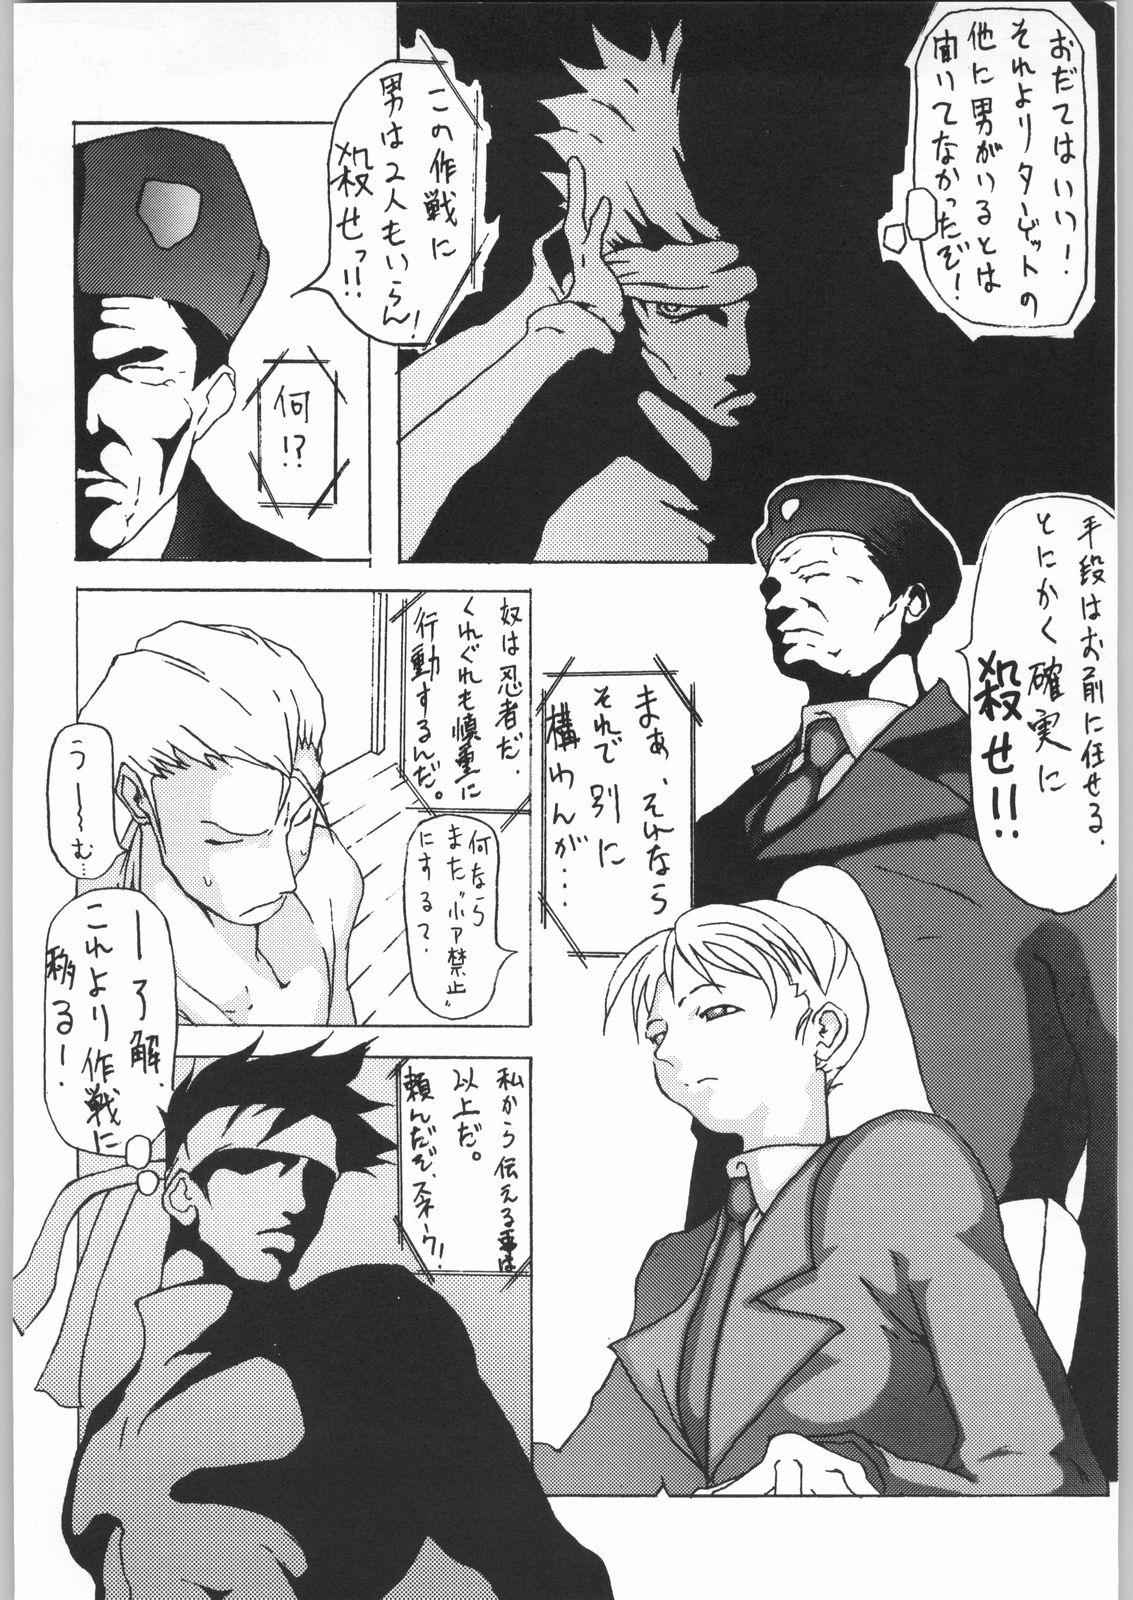 Action Shiranui - King of fighters Making Love Porn - Page 7